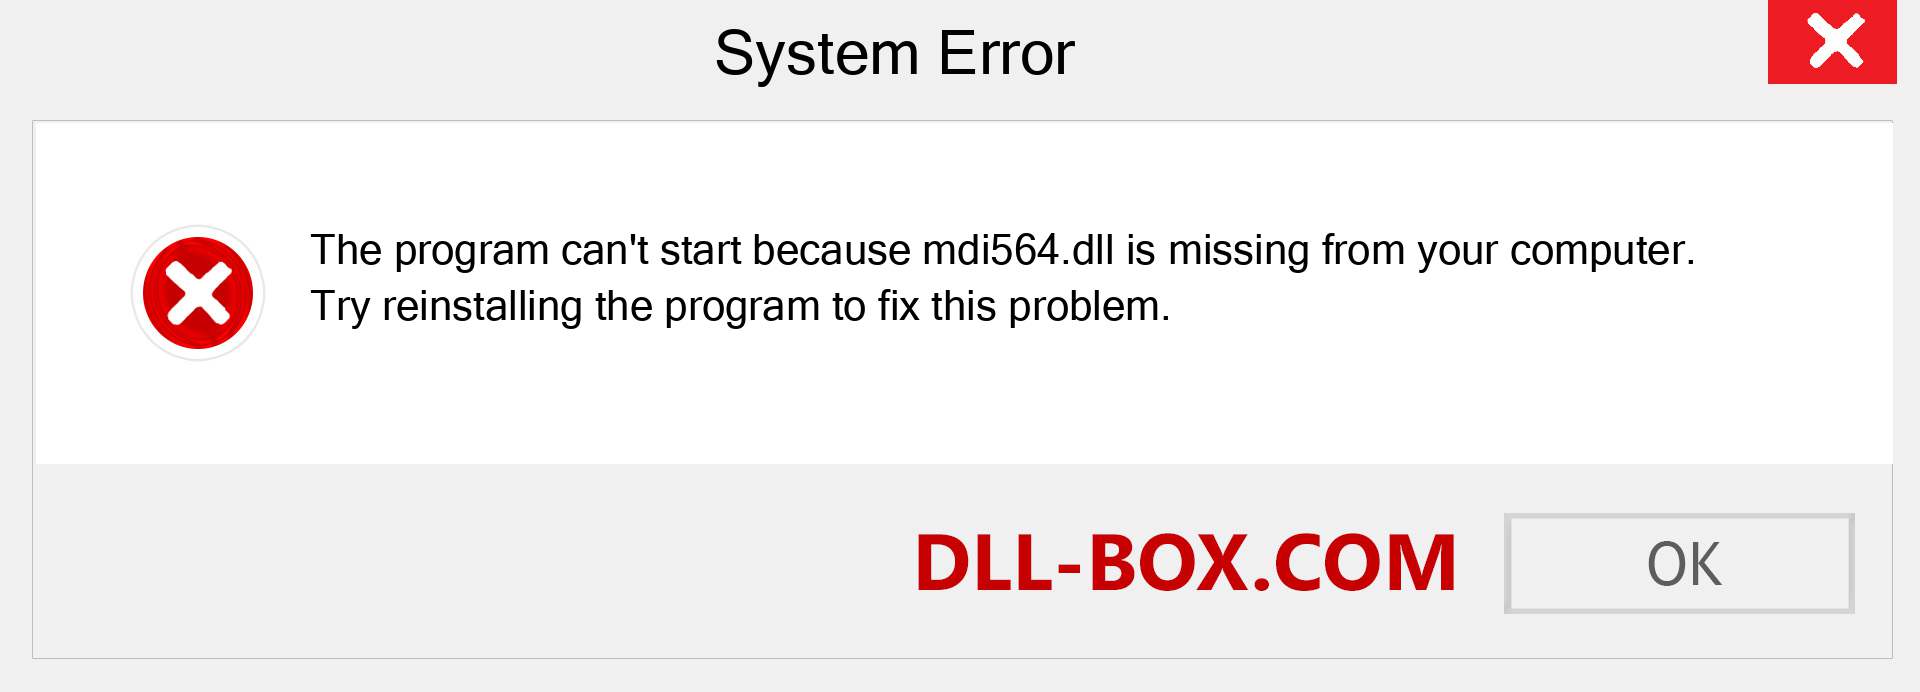  mdi564.dll file is missing?. Download for Windows 7, 8, 10 - Fix  mdi564 dll Missing Error on Windows, photos, images